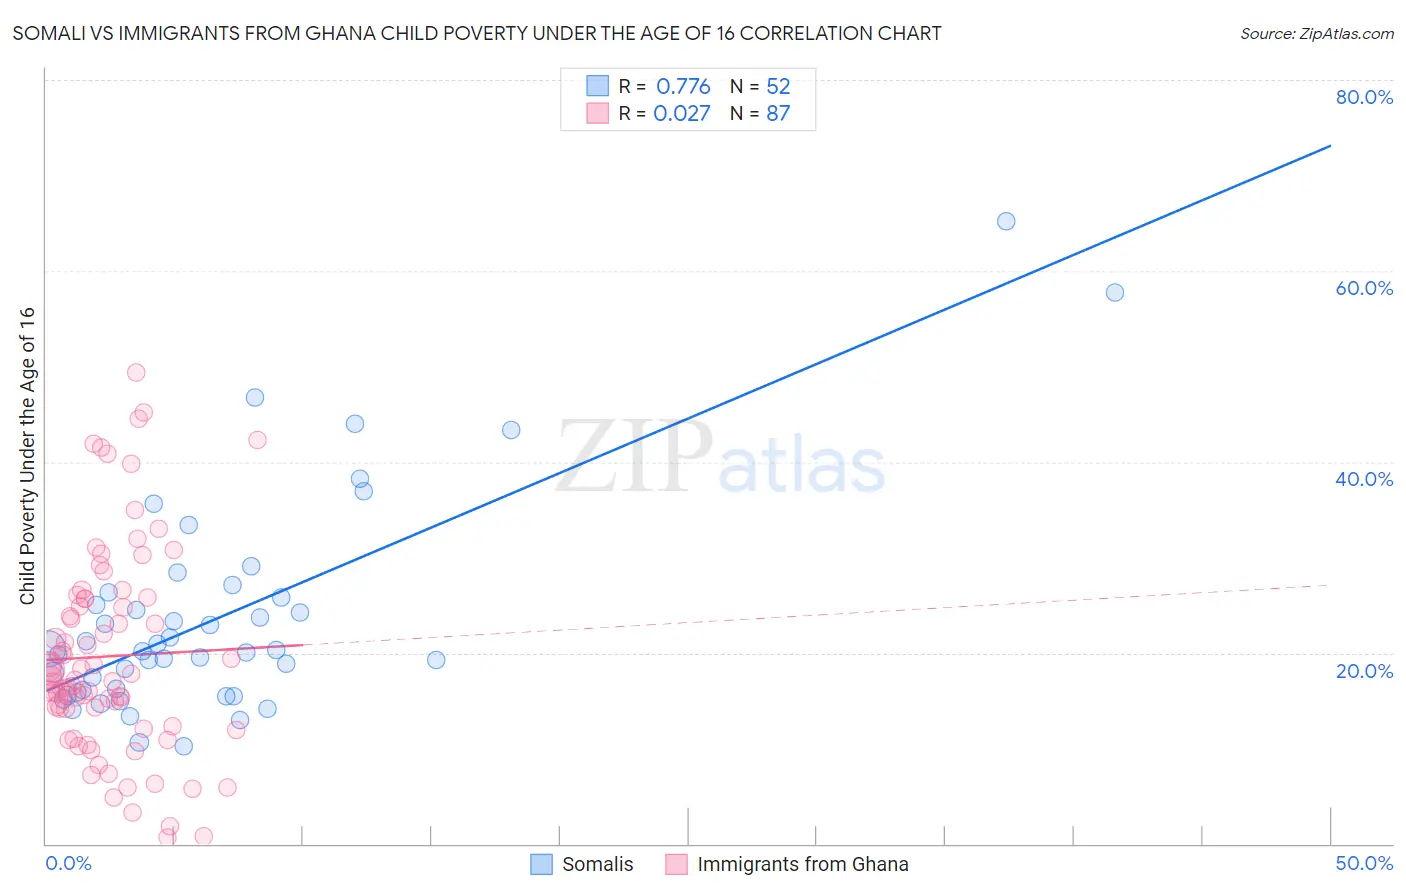 Somali vs Immigrants from Ghana Child Poverty Under the Age of 16